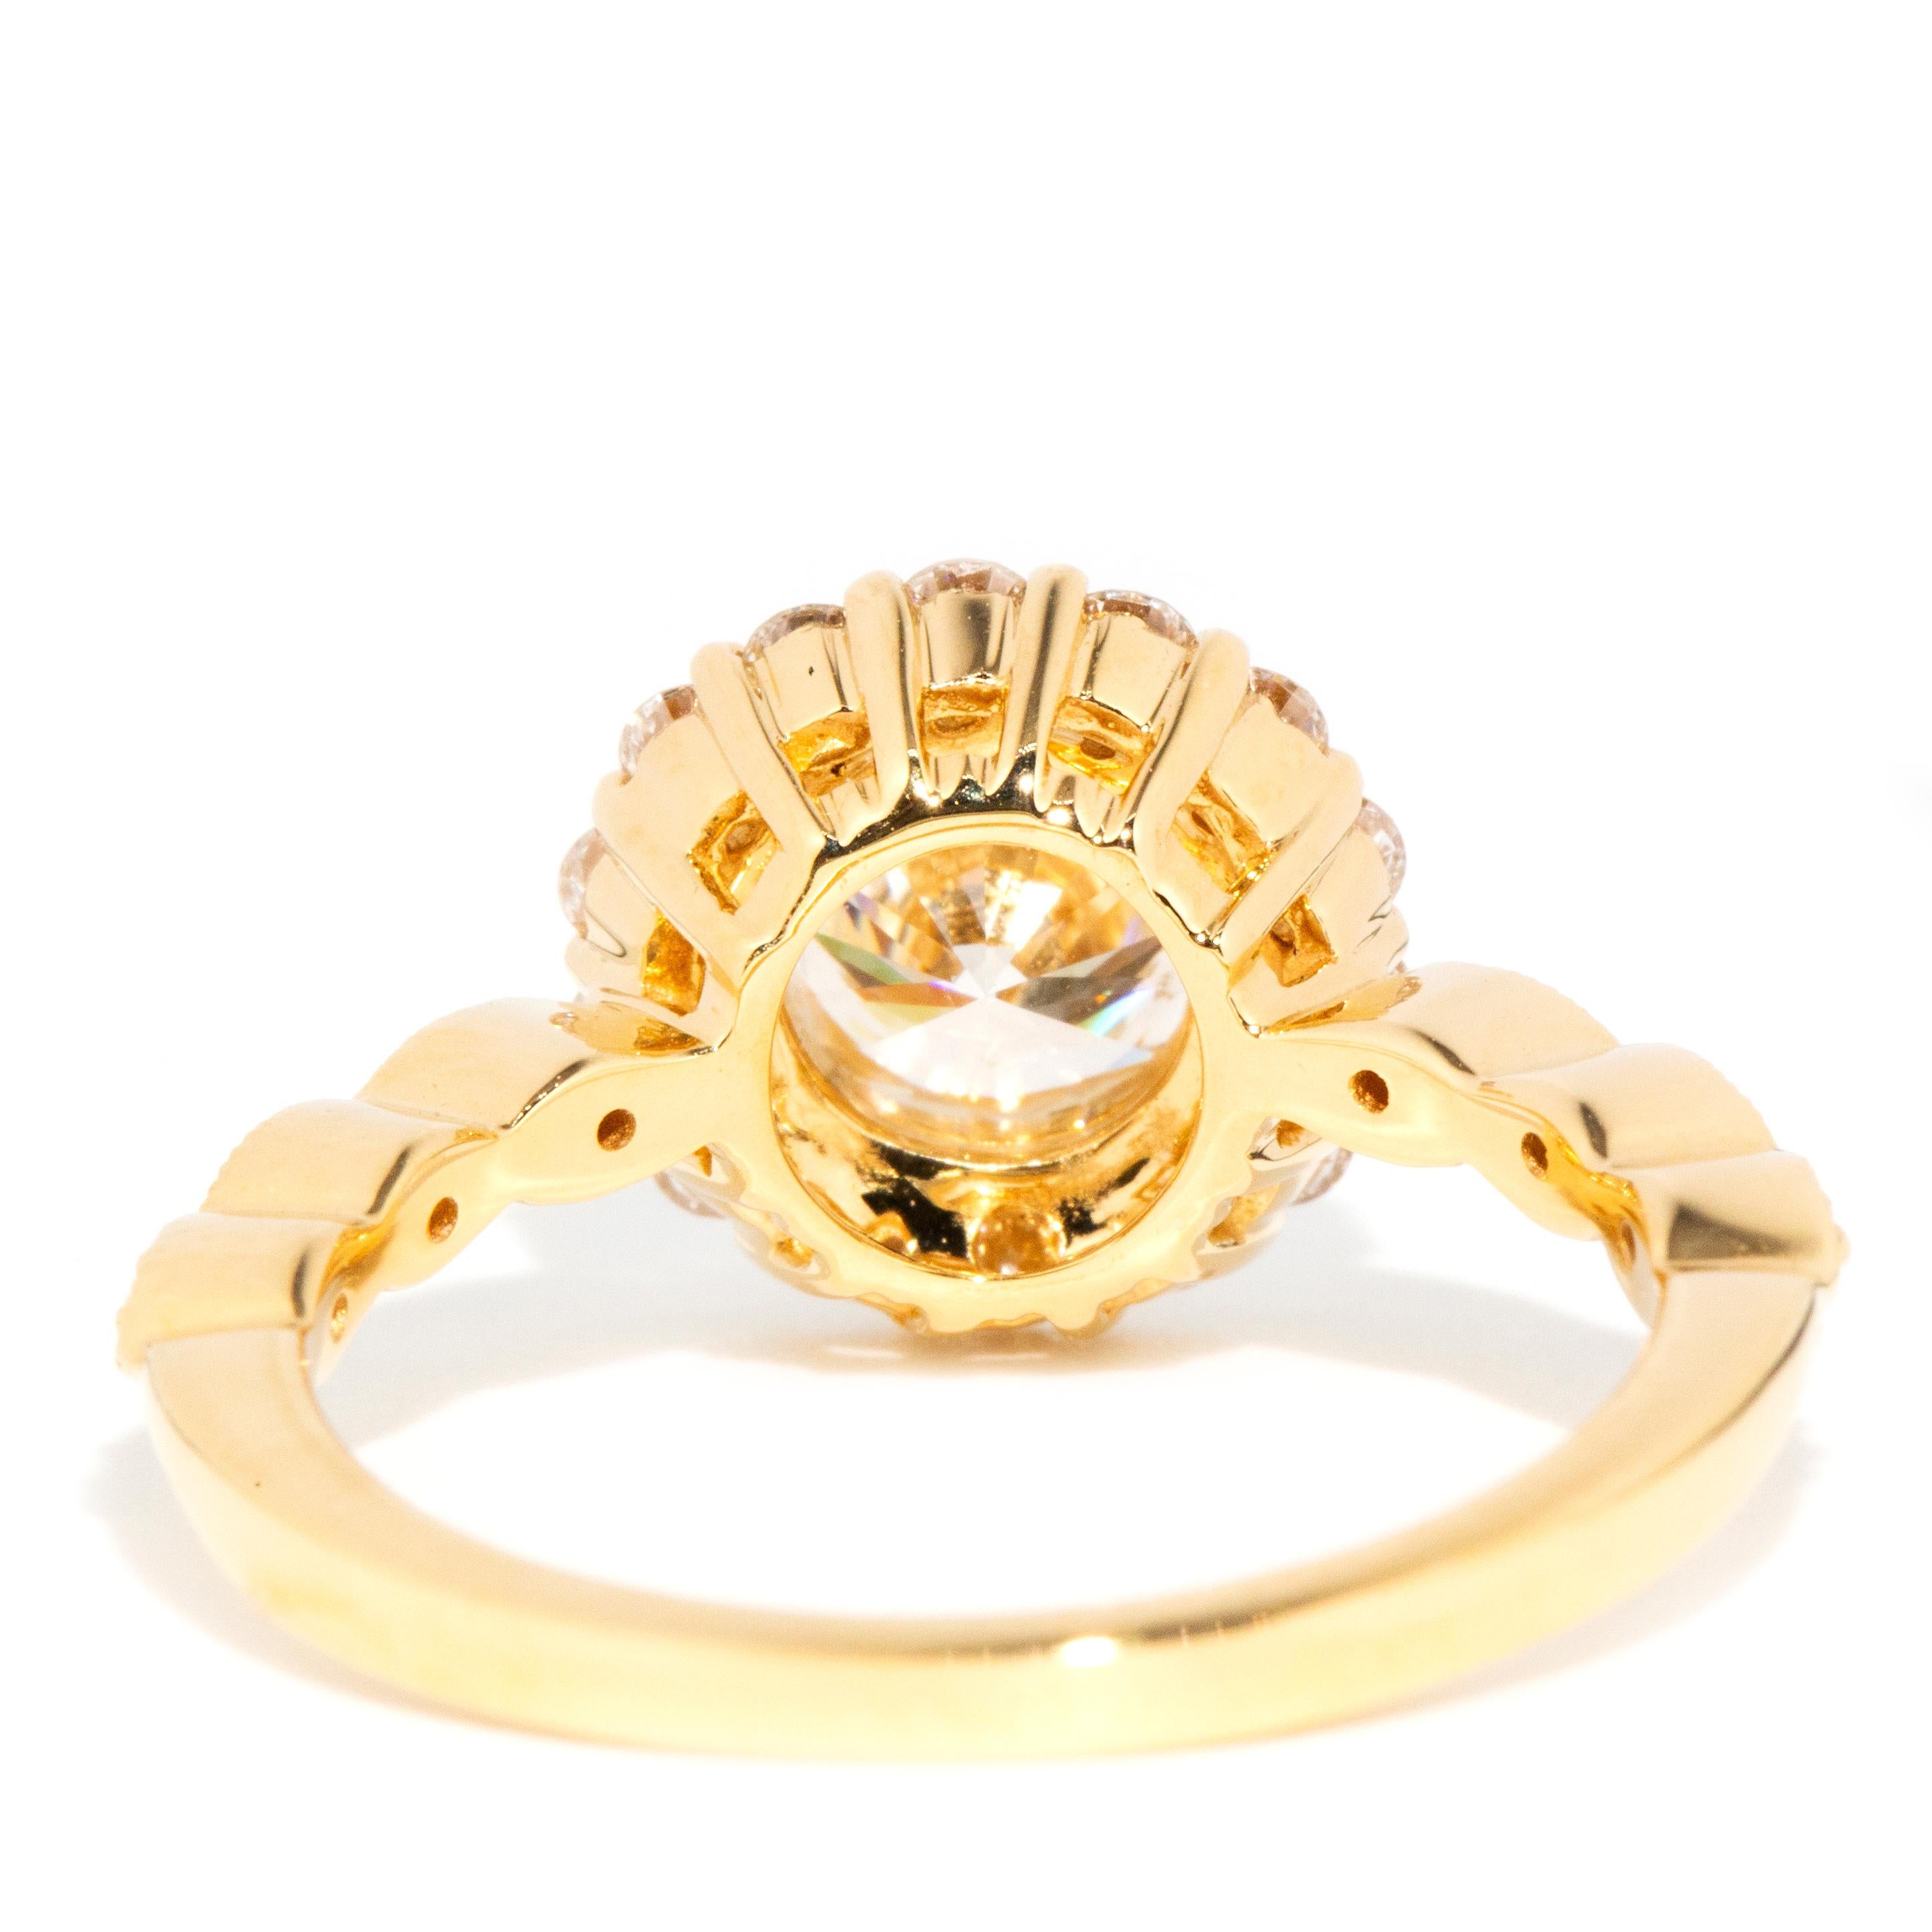 GIA Certified 1.01 Carat Diamond Halo Cluster Ring in 18 Carat Yellow Gold For Sale 1